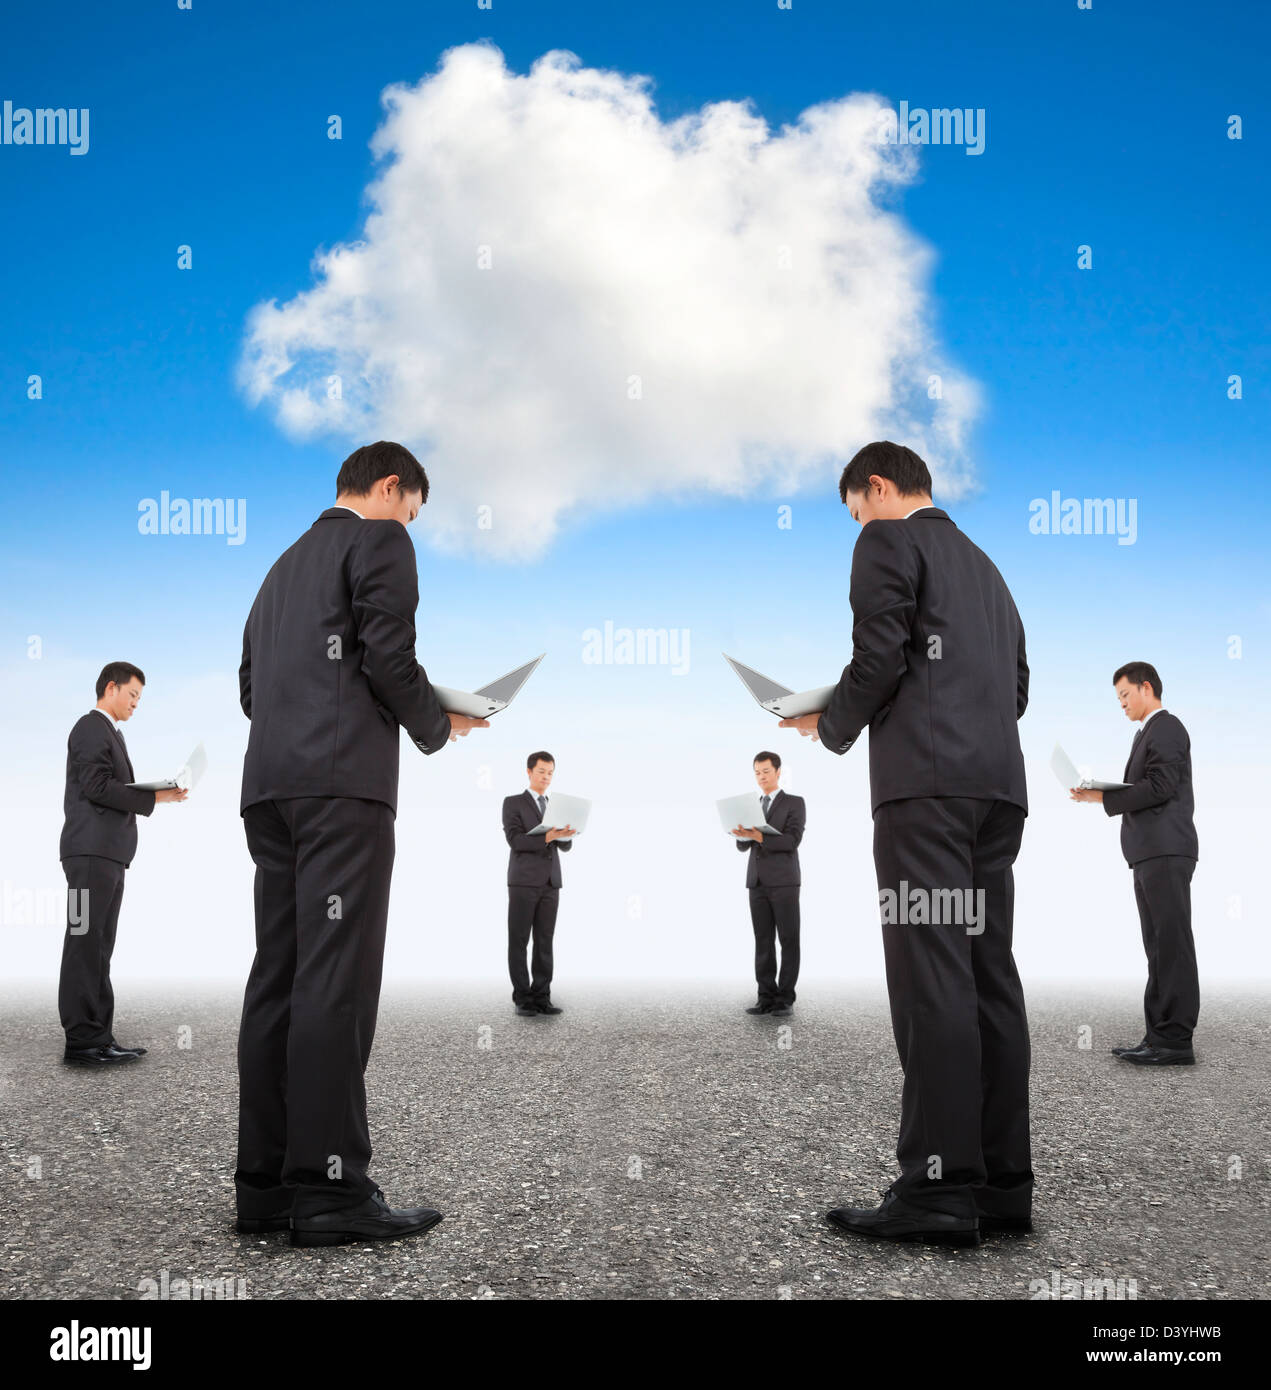 cooperation business and cloud computing concept Stock Photo